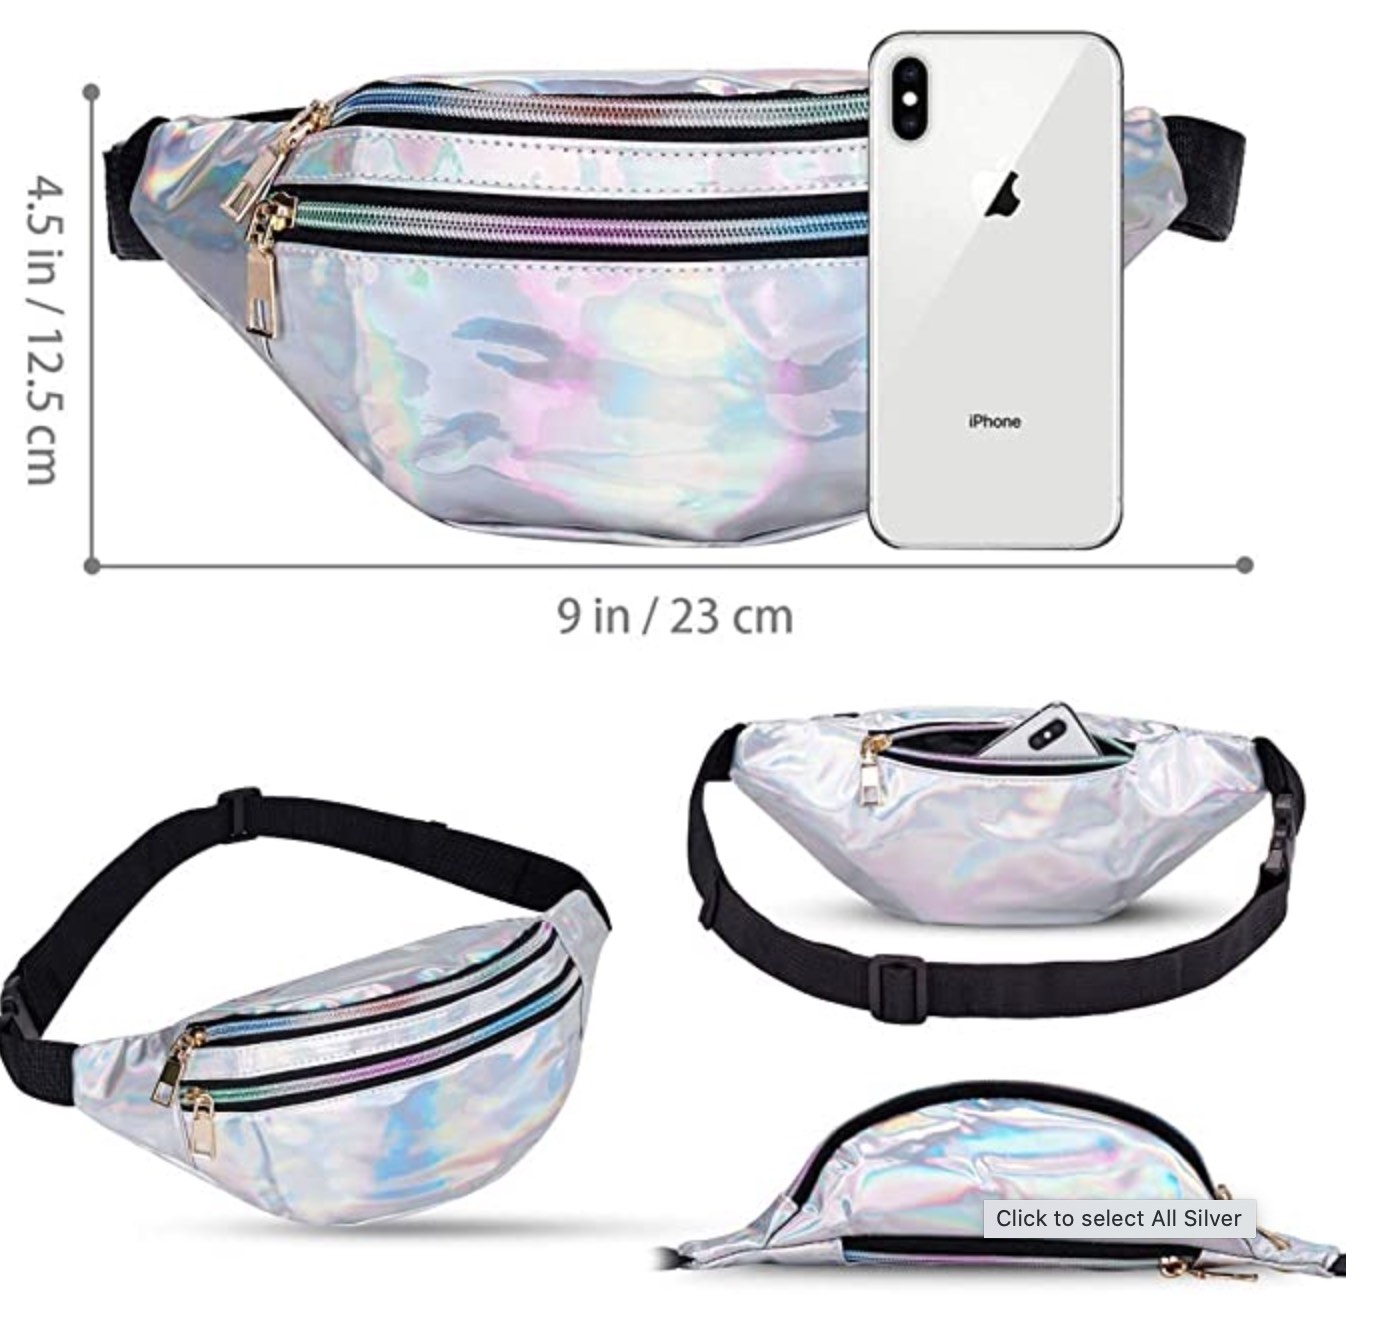 Concerts Hiking for Women Girls Festival Silver Cute Fashion Waist Bag Belt Bags Stylish Bum Bag Holographic Rave Fanny Pack Glitter Fanny Pack Running Travel Rave Great for Games 